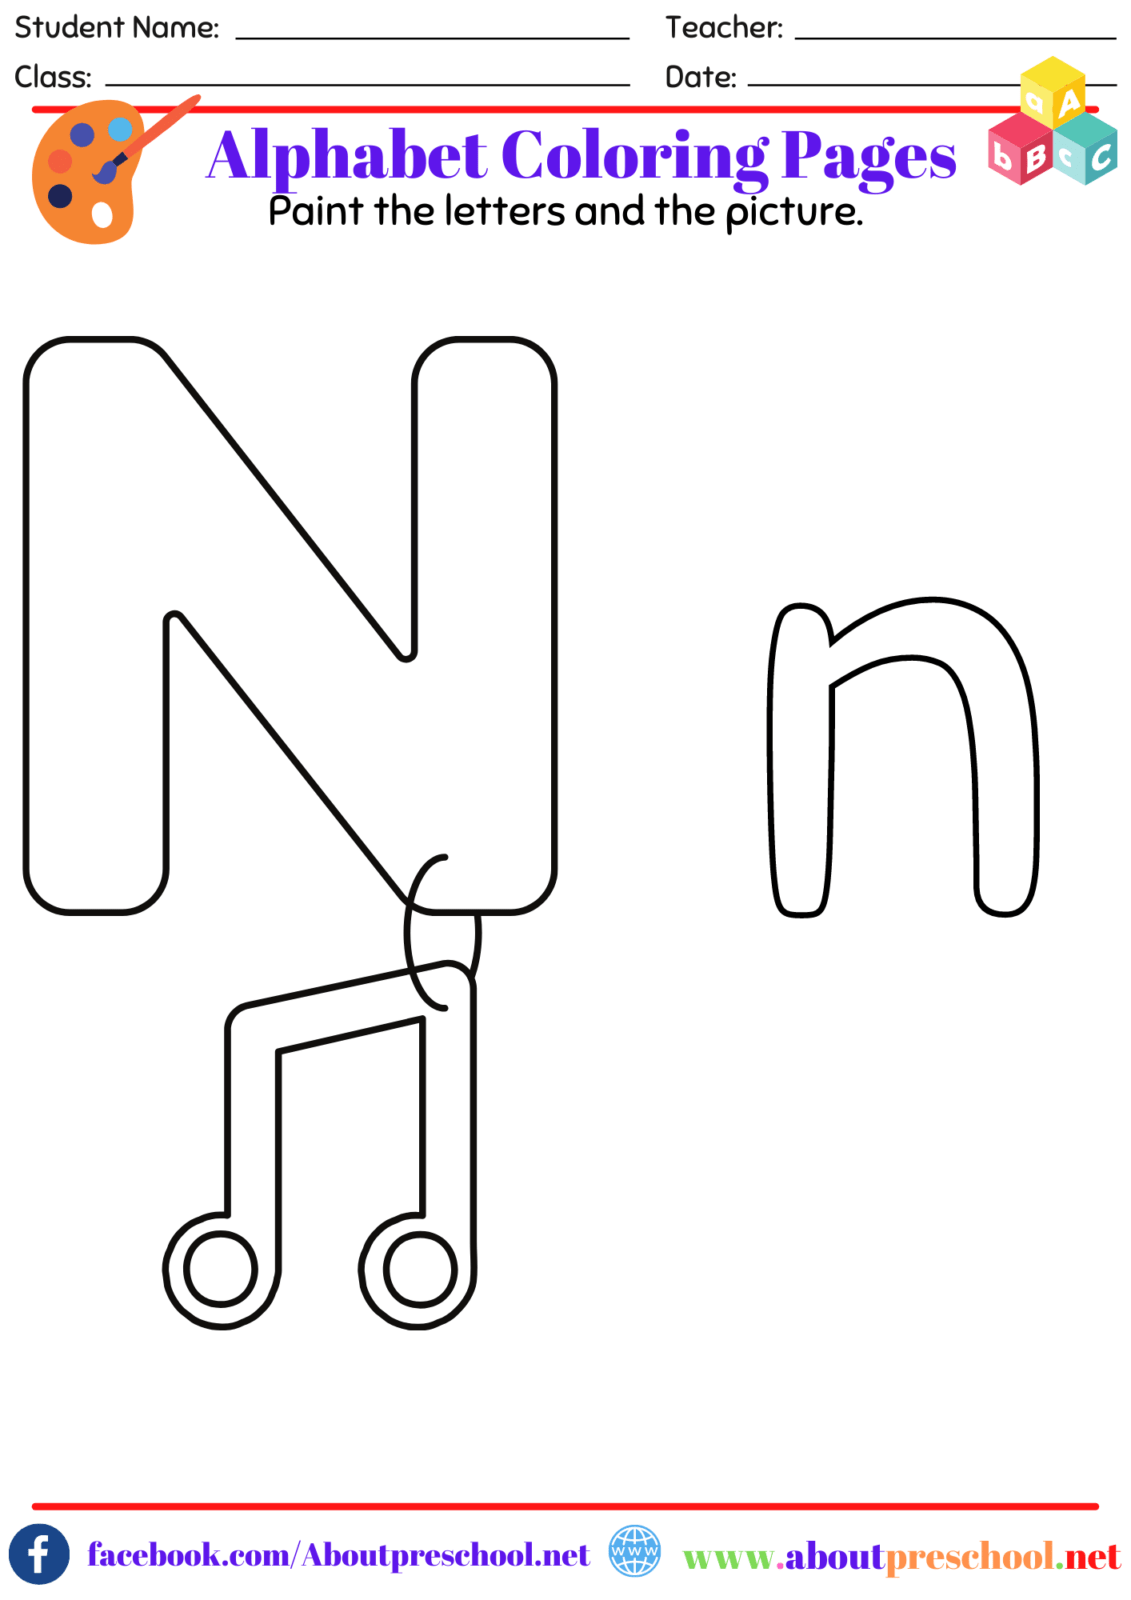 Alphabet Coloring Pages-n